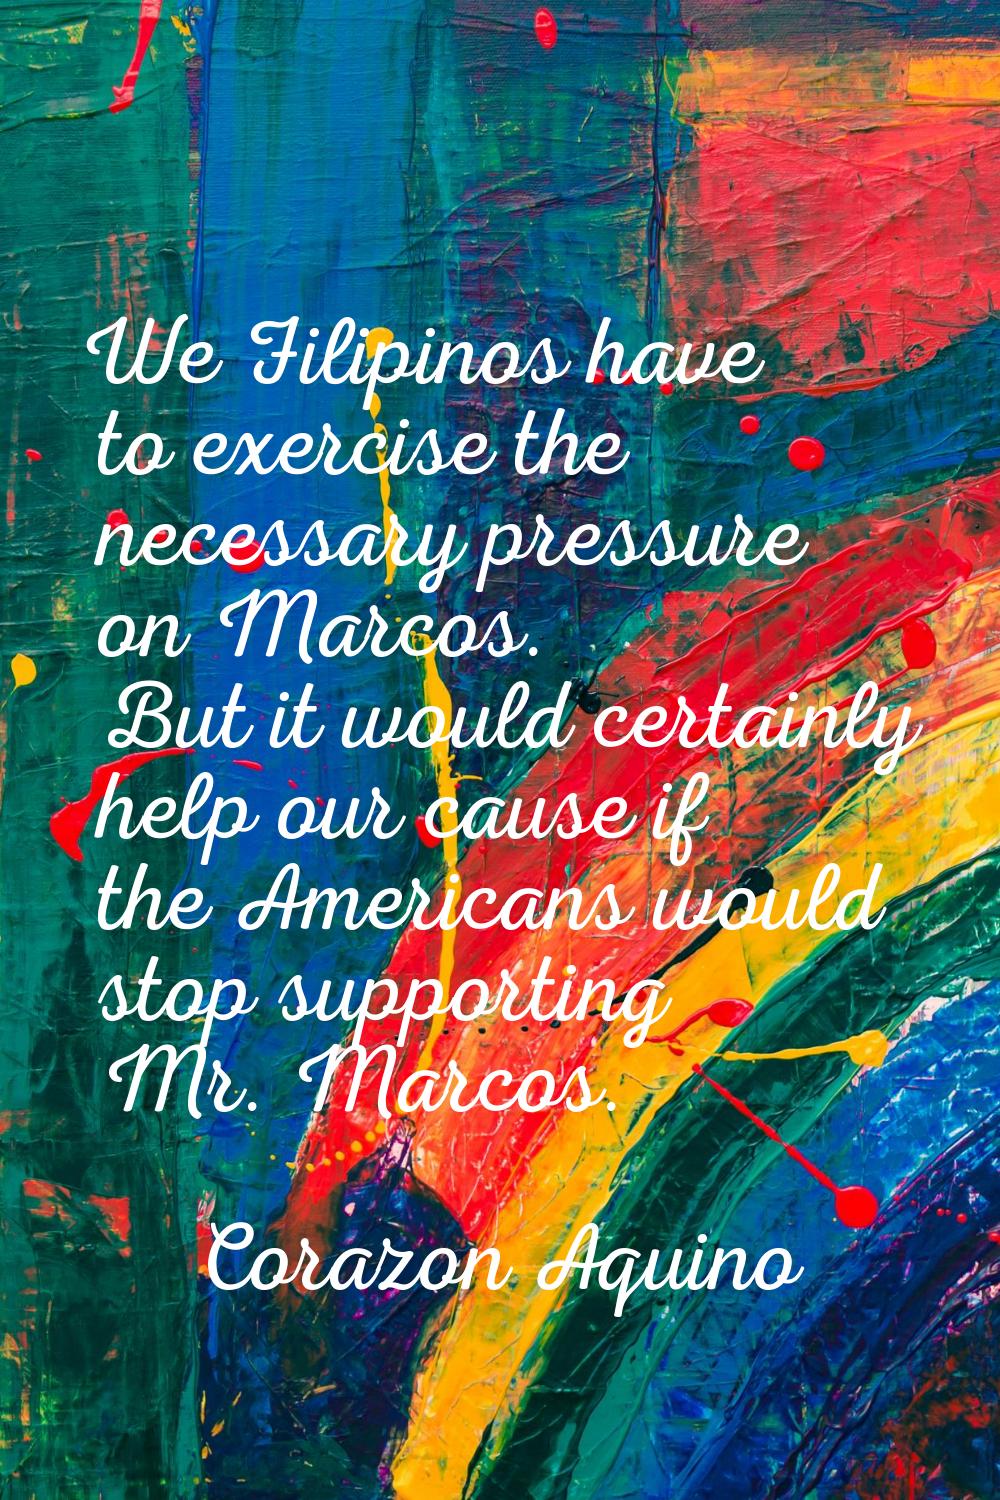 We Filipinos have to exercise the necessary pressure on Marcos. But it would certainly help our cau